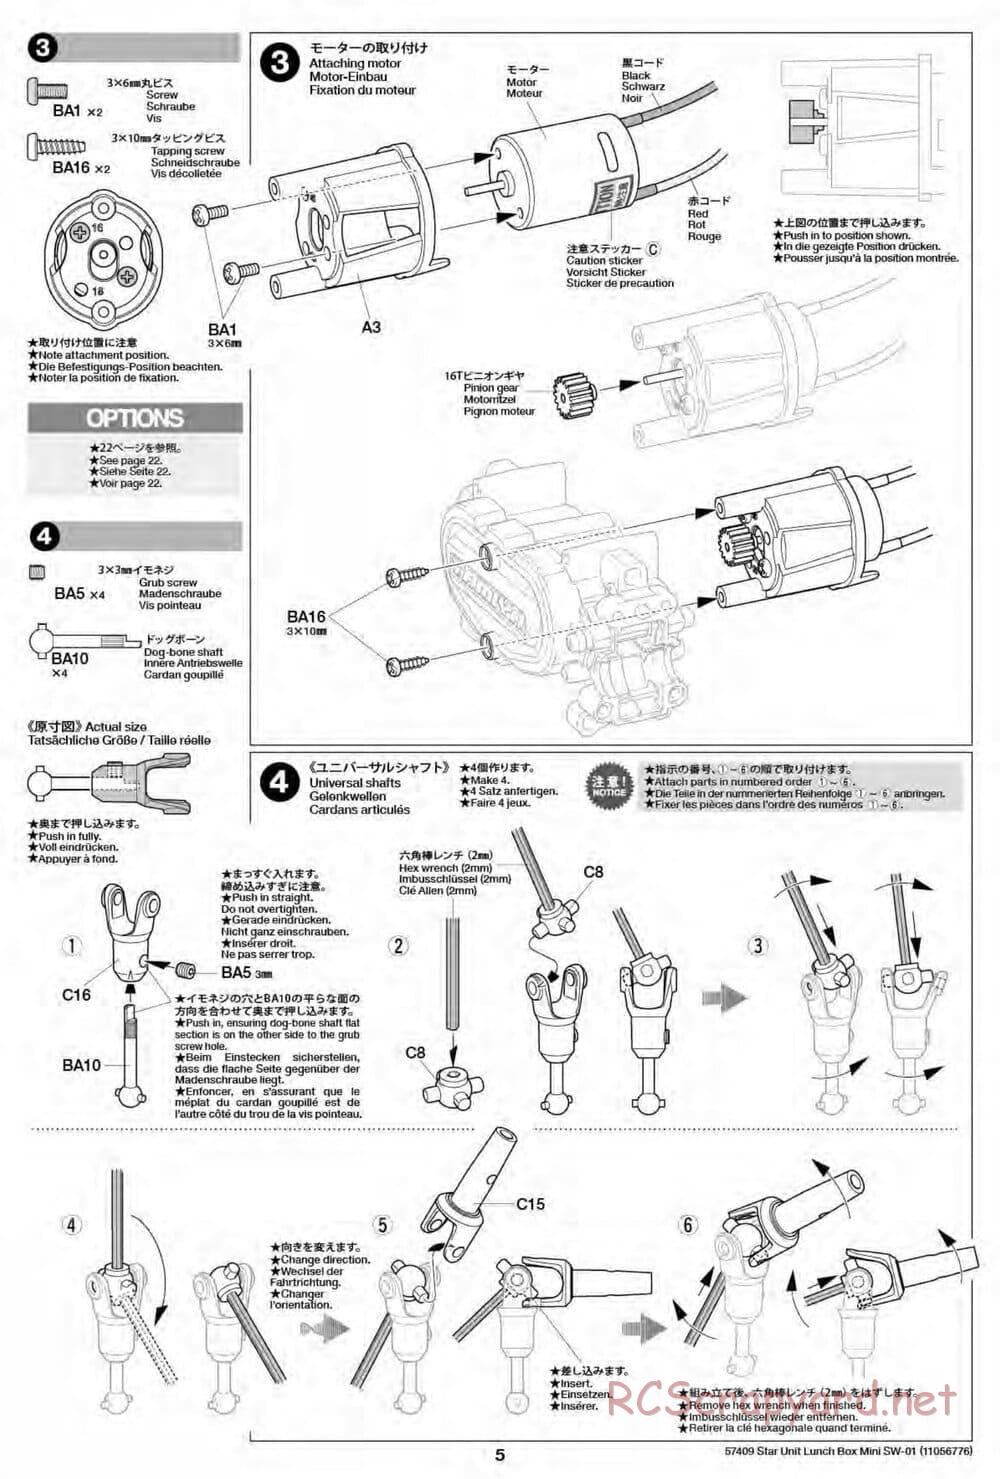 Tamiya - Lunch Box Mini - SW-01 Chassis - Manual - Page 5